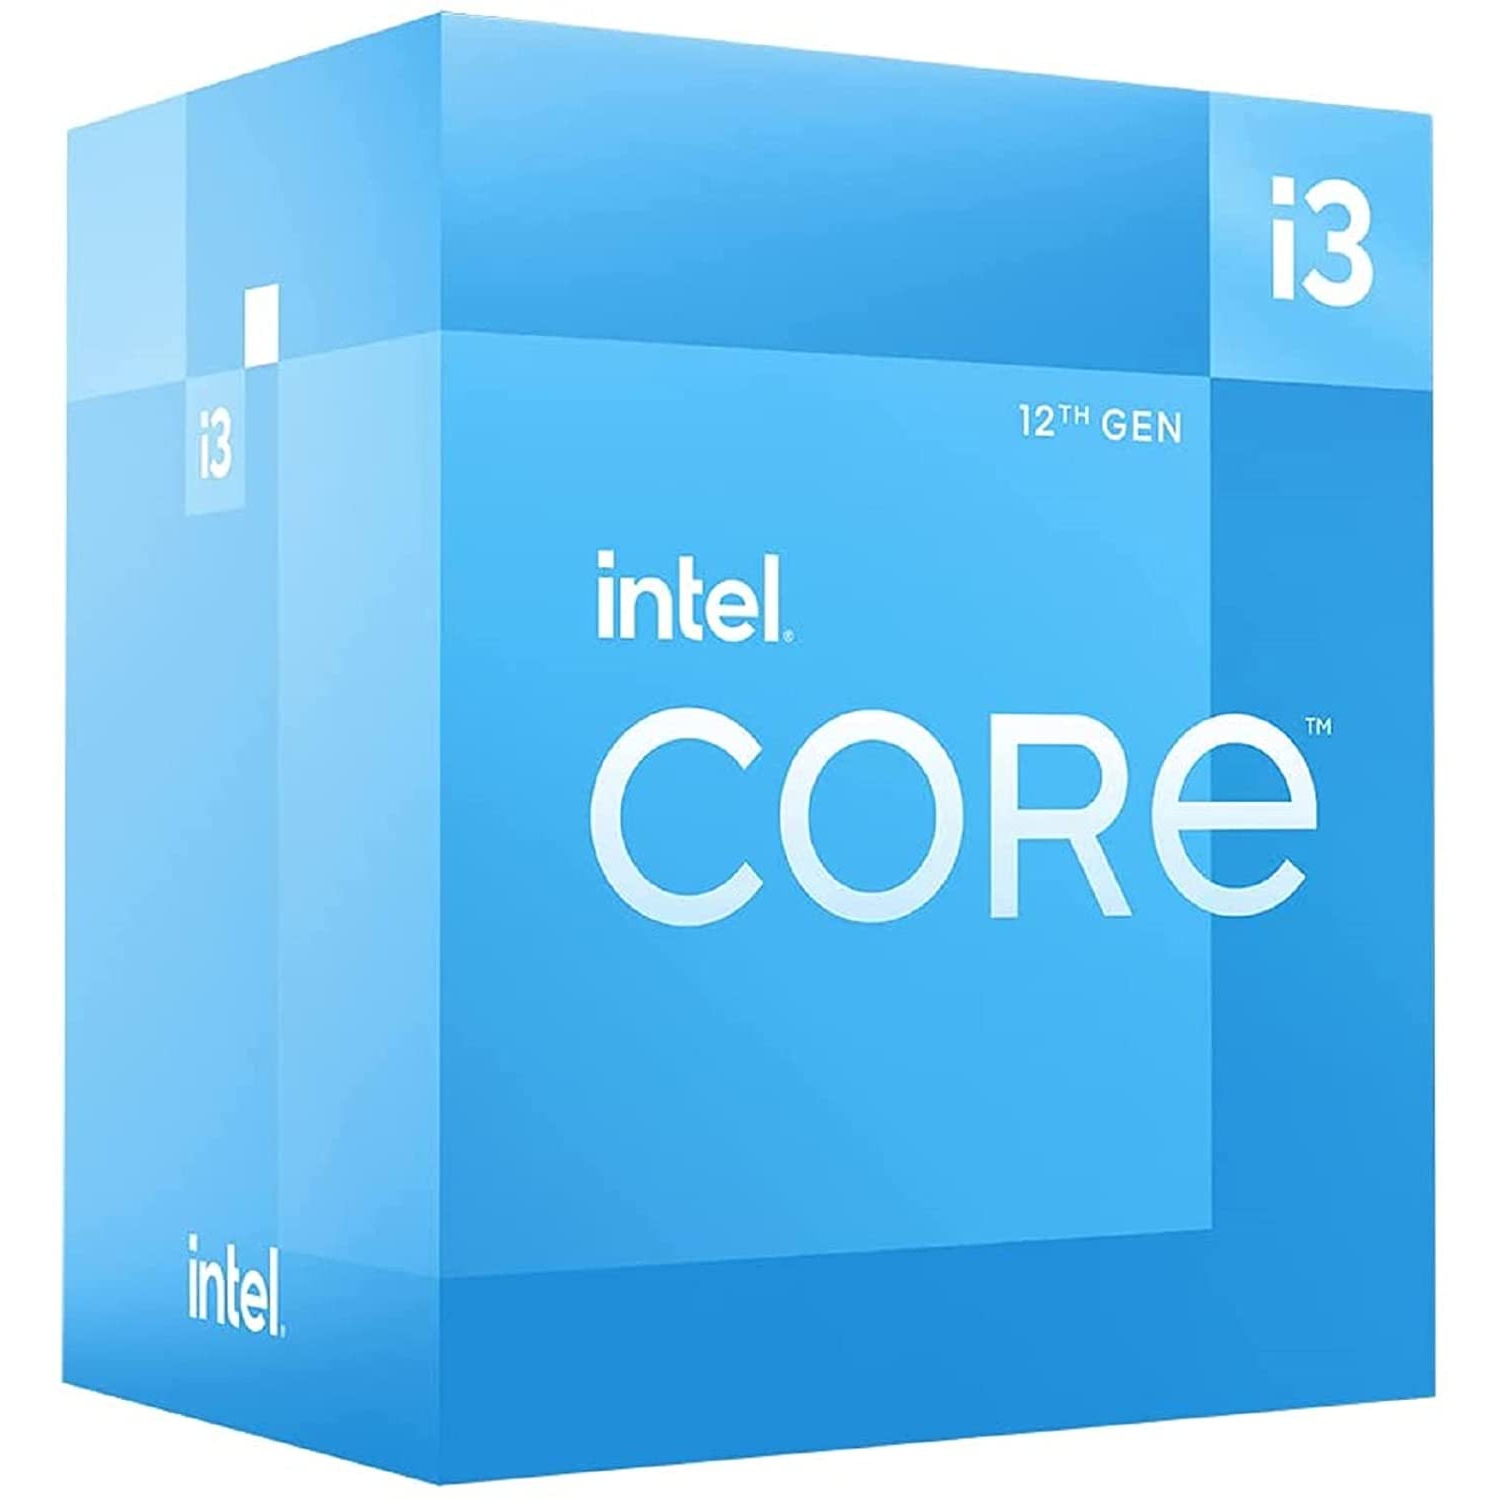 Intel Core (12th Gen) i3-12100 (4 Cores / 8 Threads) 3.30 GHz (Max 4.30 GHz) Processor - Retail Pack